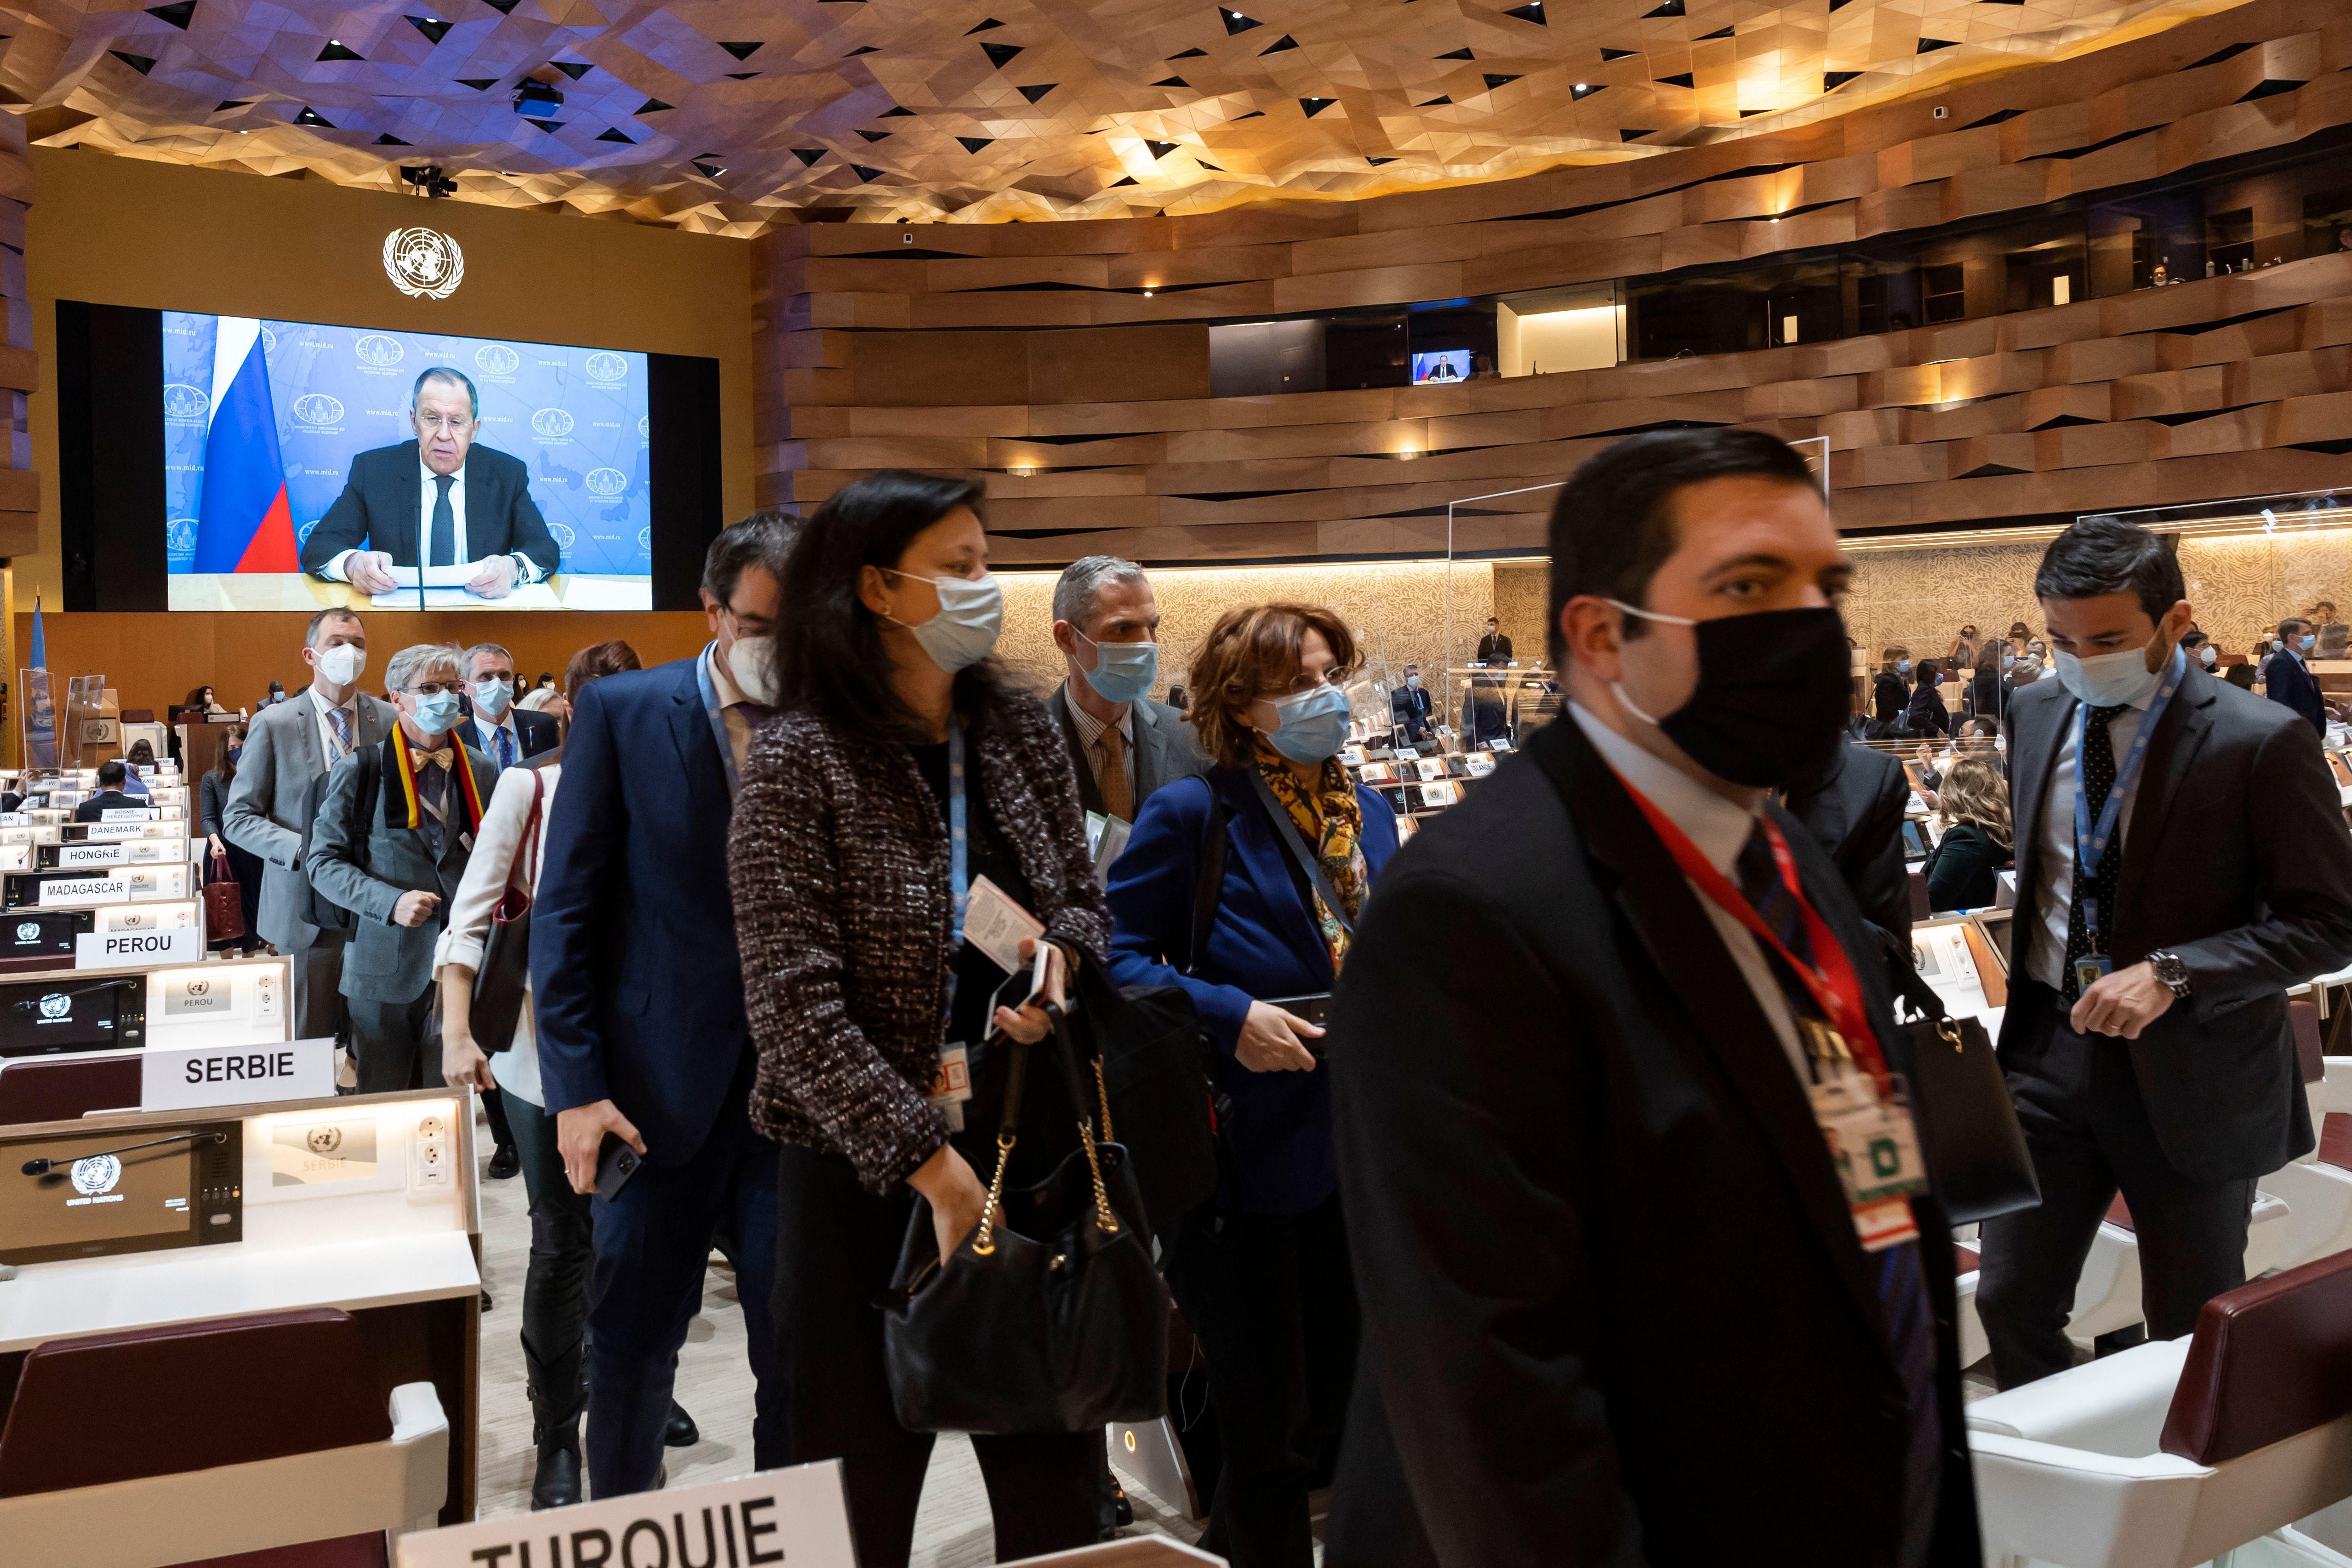 Ambassadors and diplomats protest Moscow's war on Ukraine by walking out while Russian Foreign Minister Sergey Lavrov gives a pre-recorded video message at the 49th session of the United Nations Human Rights Council in Geneva, Switzerland on March 1, 2022.